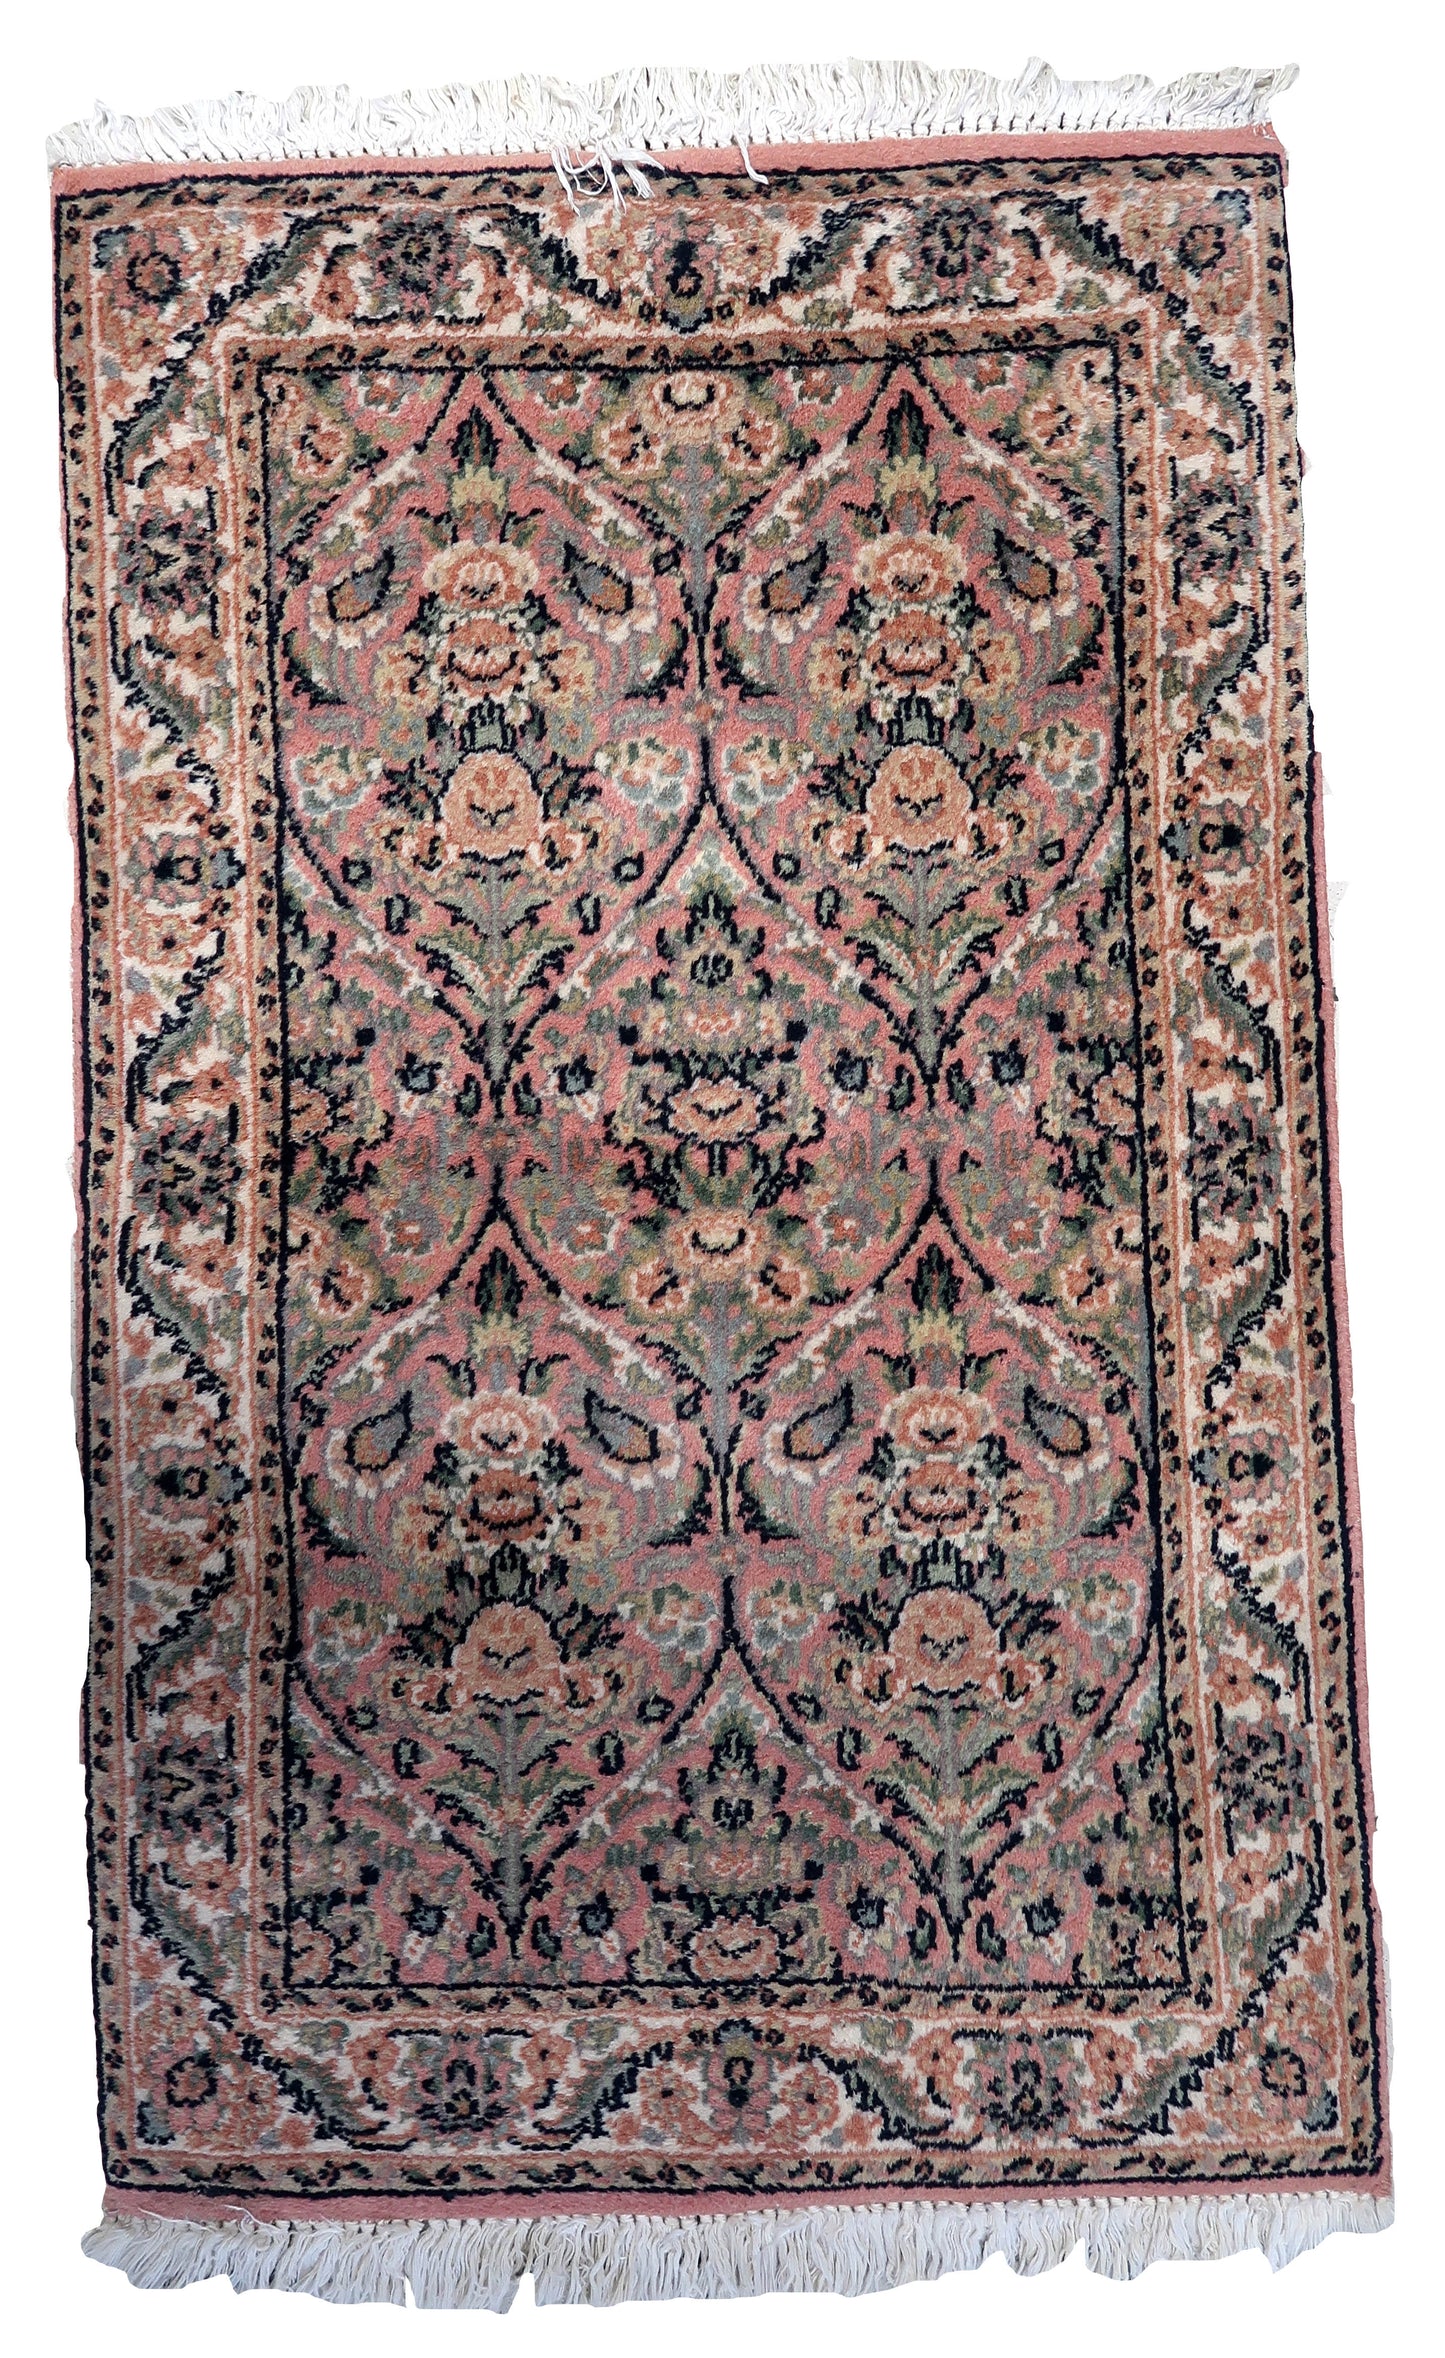 Handmade vintage Persian Kerman rug with intricate patterns and pastel color palette.